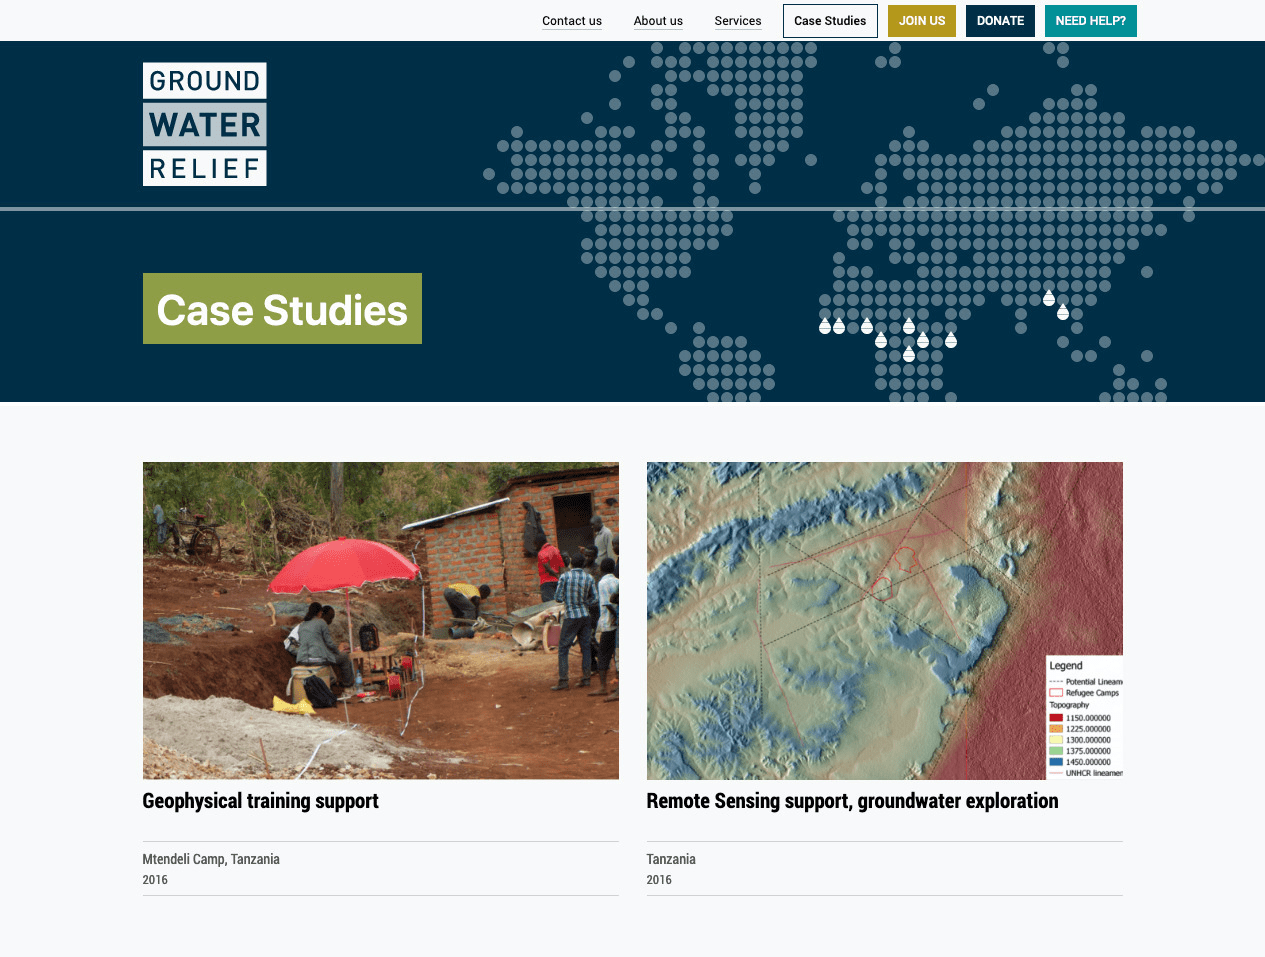 Screenshot from of Groundwater Relief Case Studies page